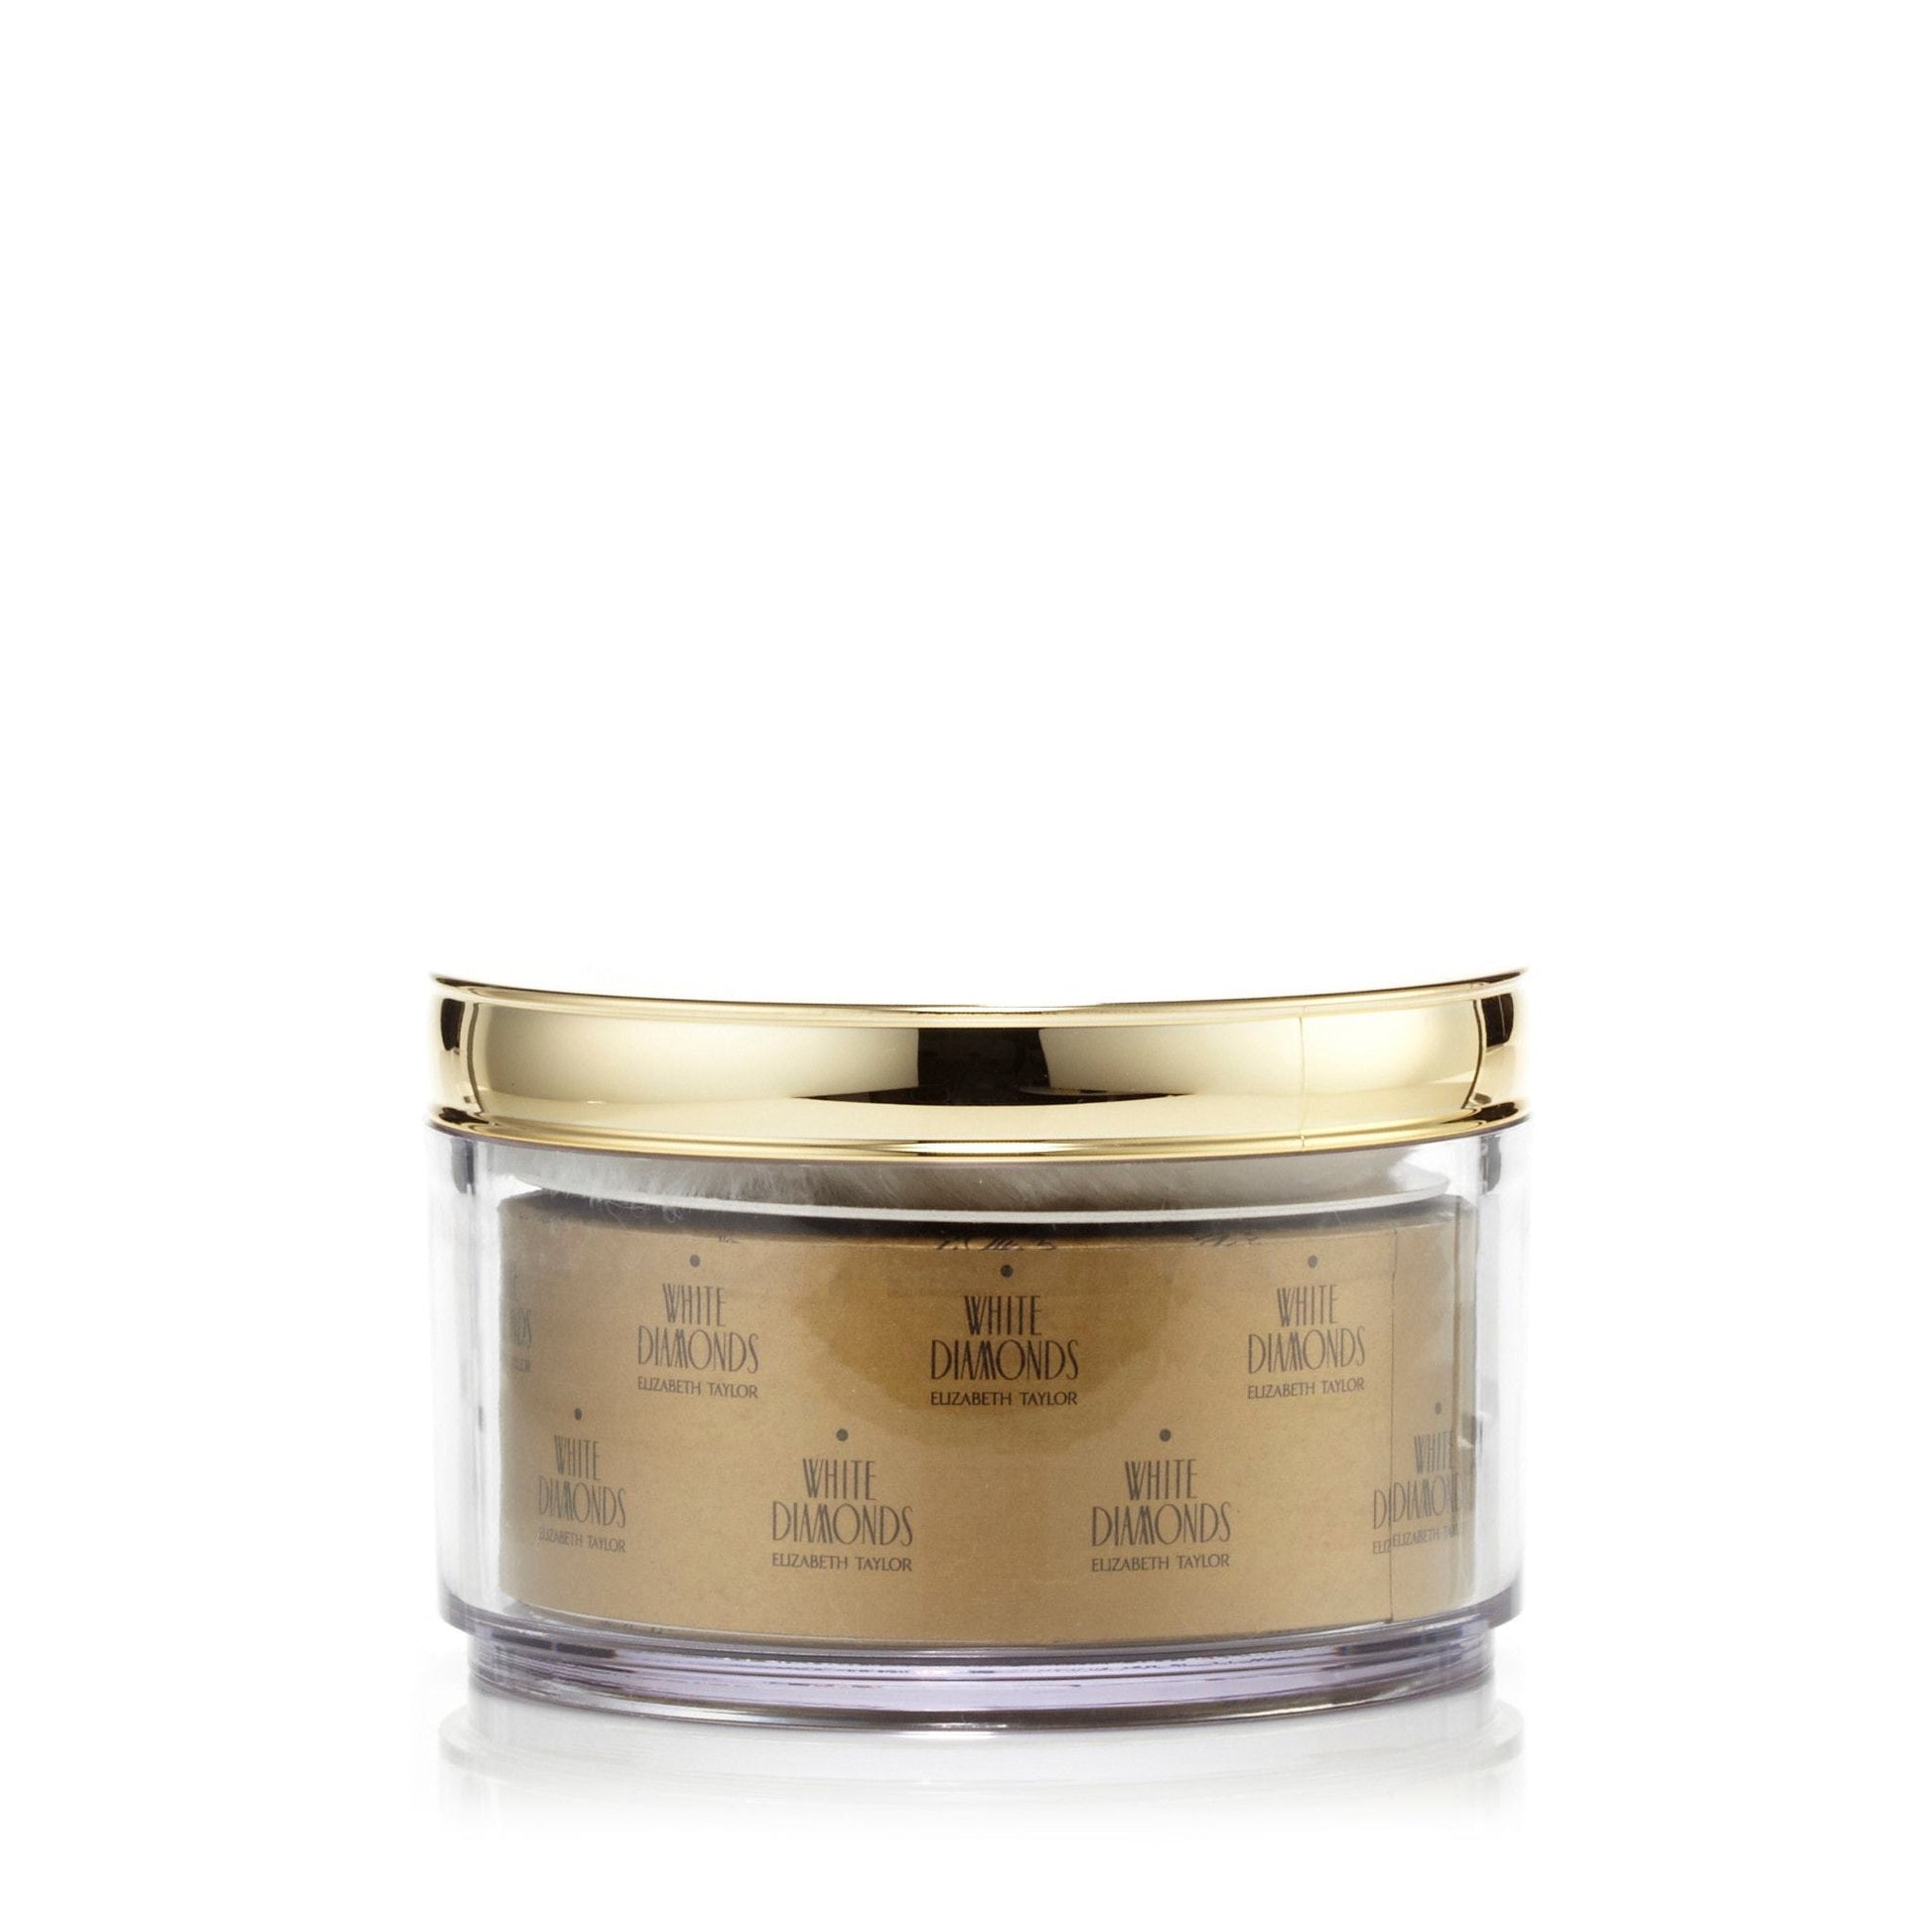 White Diamonds Dusting Powder for Women by Elizabeth Taylor, Product image 2